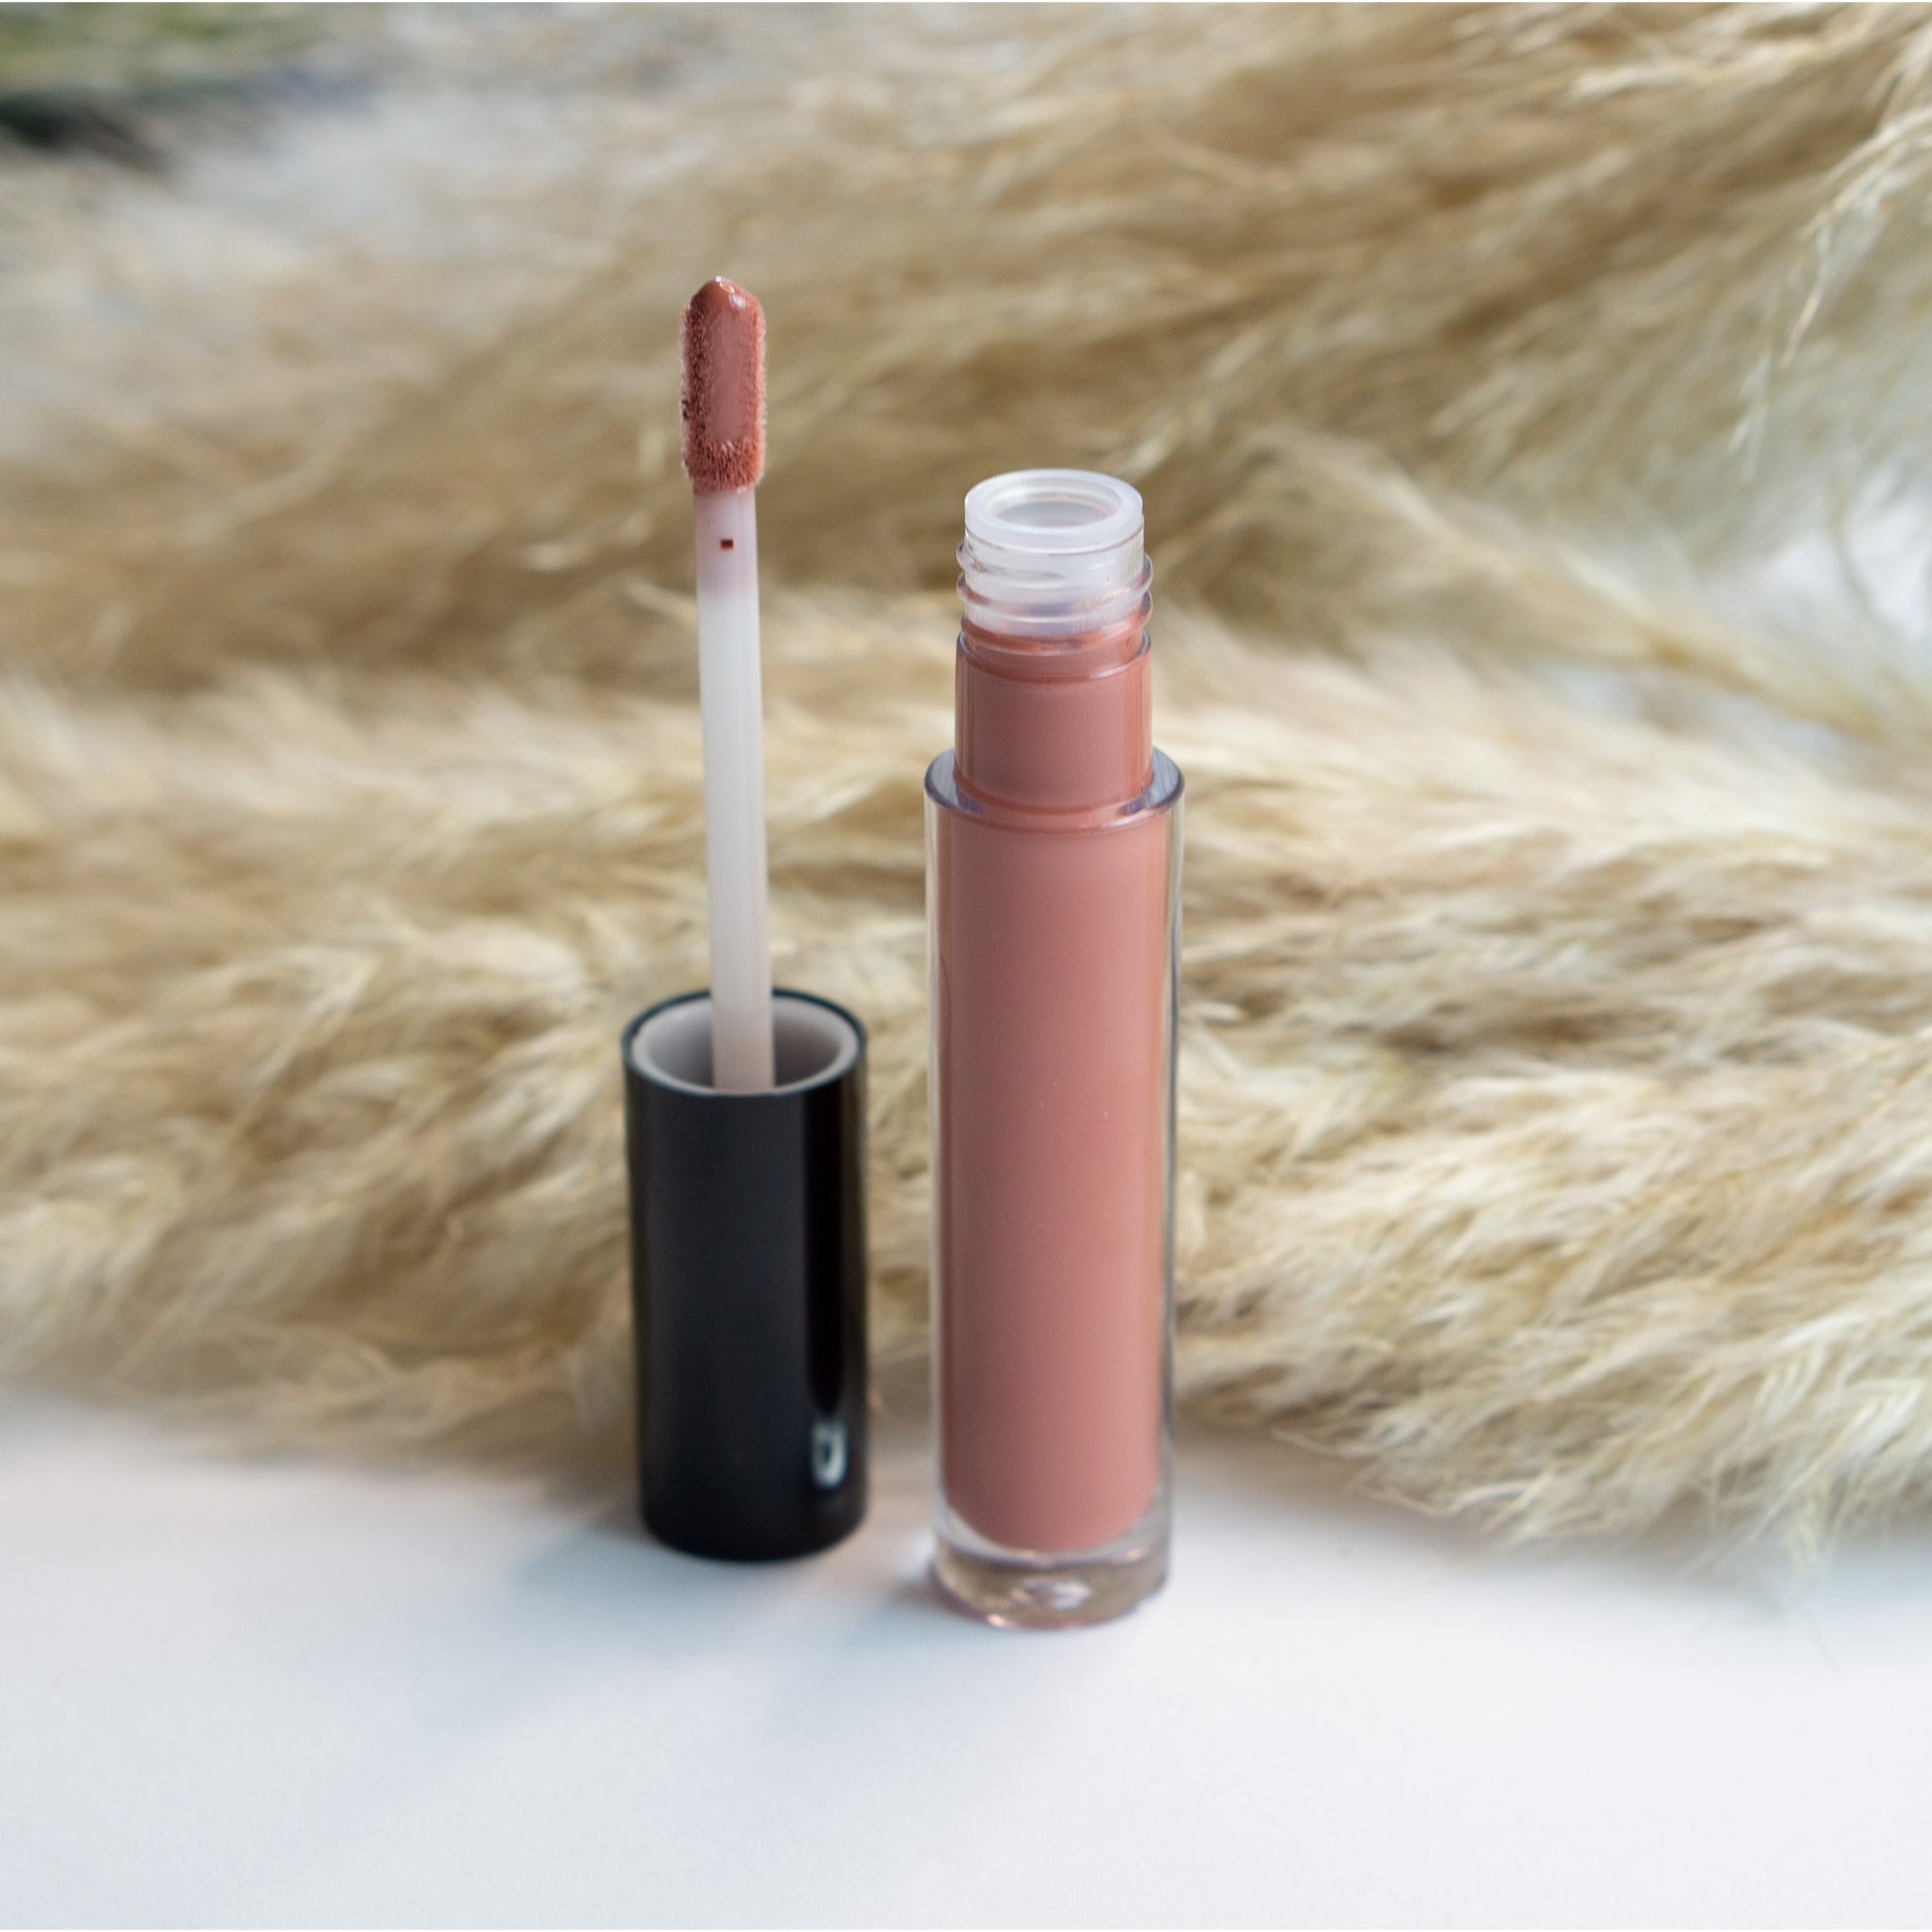 Cruisin Organics Lip Gloss in Chestnut. Use this sheer-tinted lip gloss to achieve the desired lasting shine. its accurate application and ease of use. Select from our vegan and paraben-free shimmer or natural finish options for a cruelty-free and ethical beauty crafted with love.